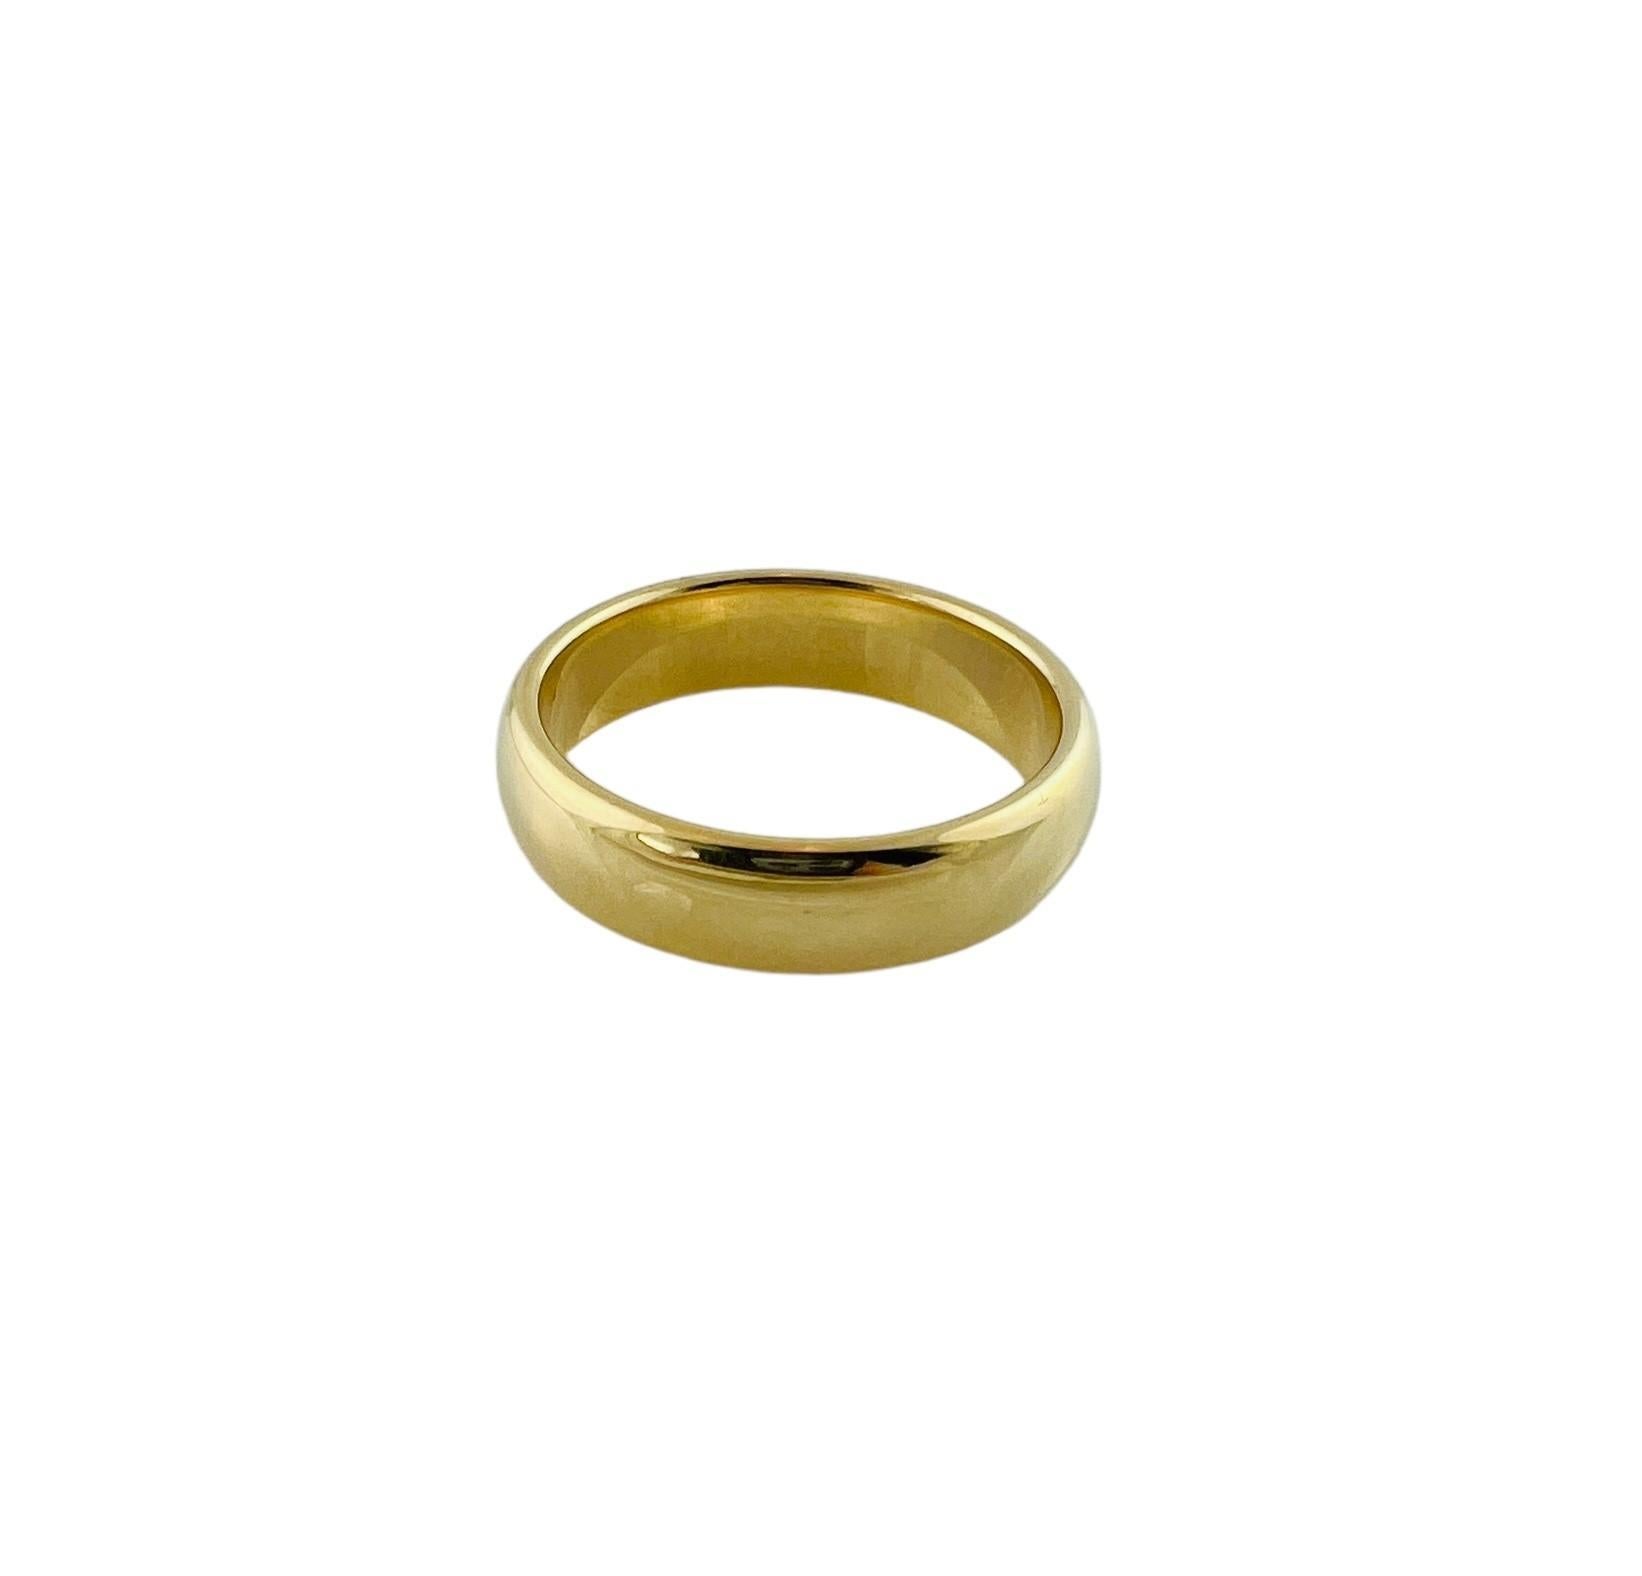 Tiffany & Co. 18K Yellow Gold Men's Wedding Band

This authentic Tiffany & Co. men's wedding band is set in 18K yellow gold

Band is a size 11

Approx. 6mm wide

Stamped Tiffany & Co. AU 750

11.0 g / 7.0 dwt

Very good preowned condition. Just